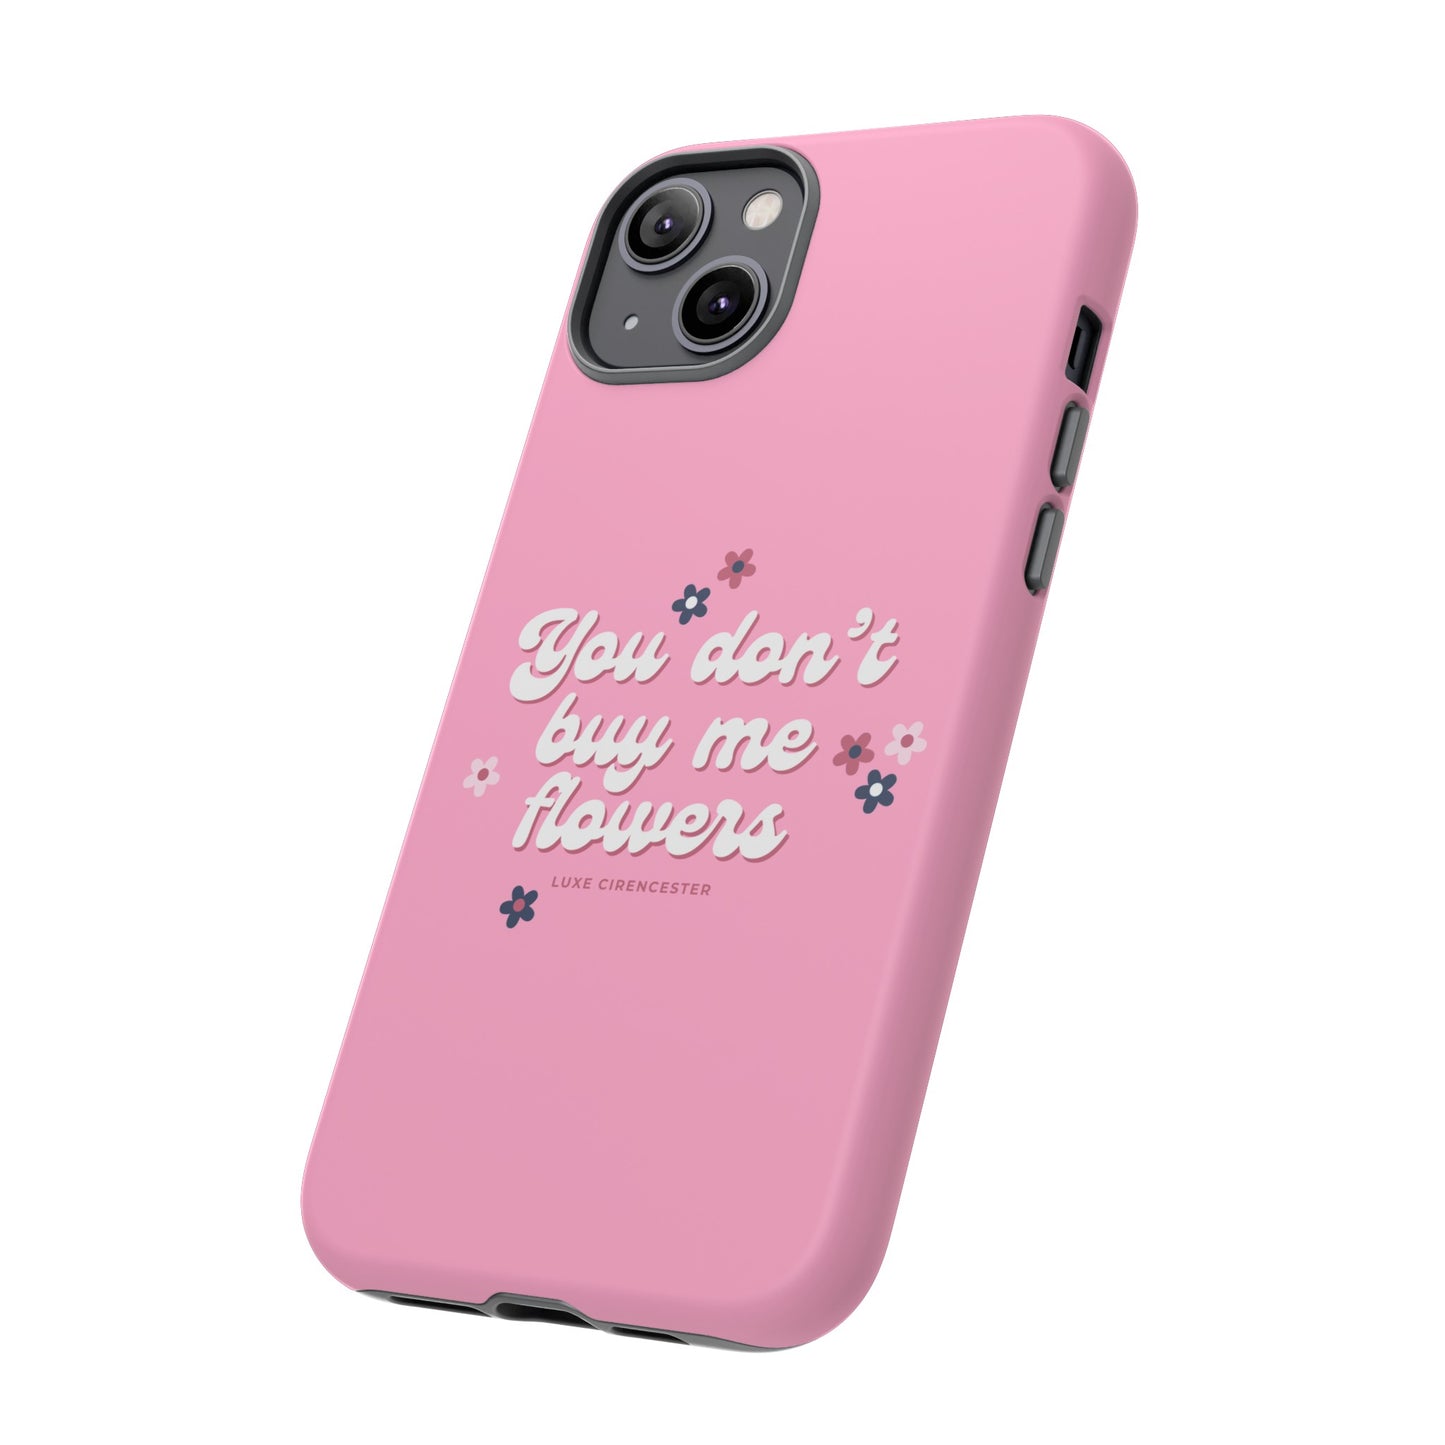 You don't buy me flowers iPhone Case